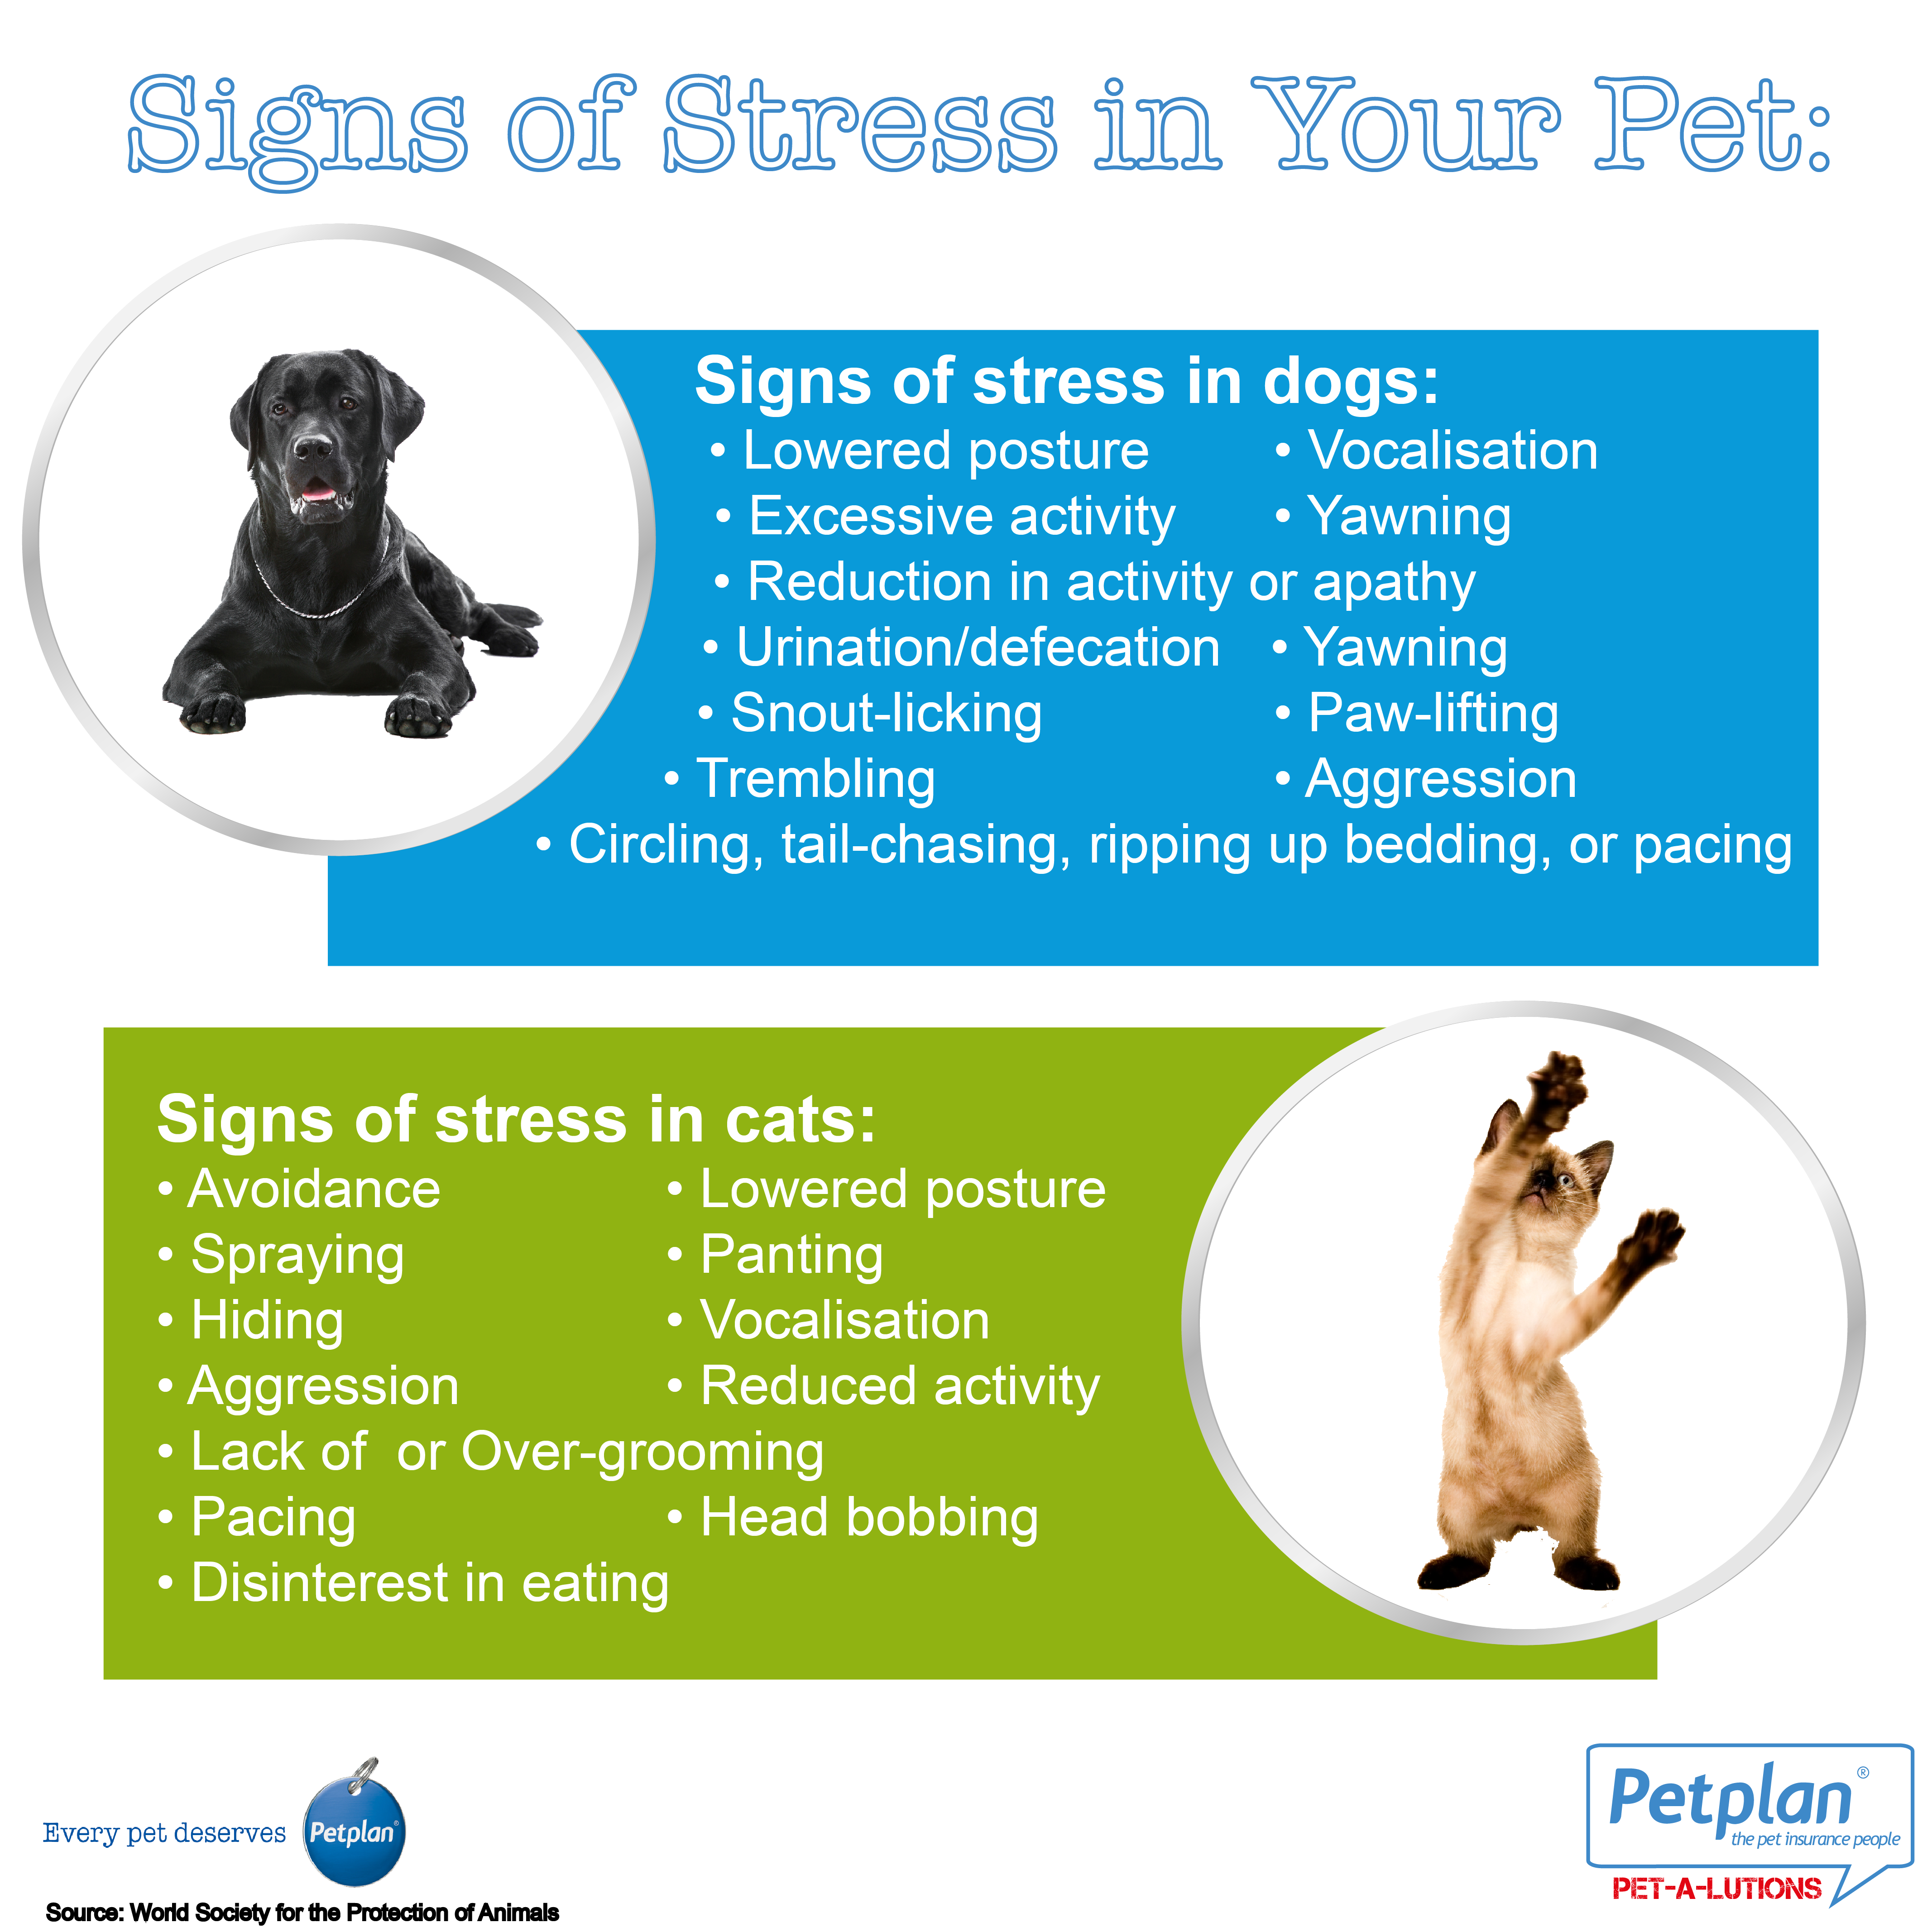 Signs of stress in your pet